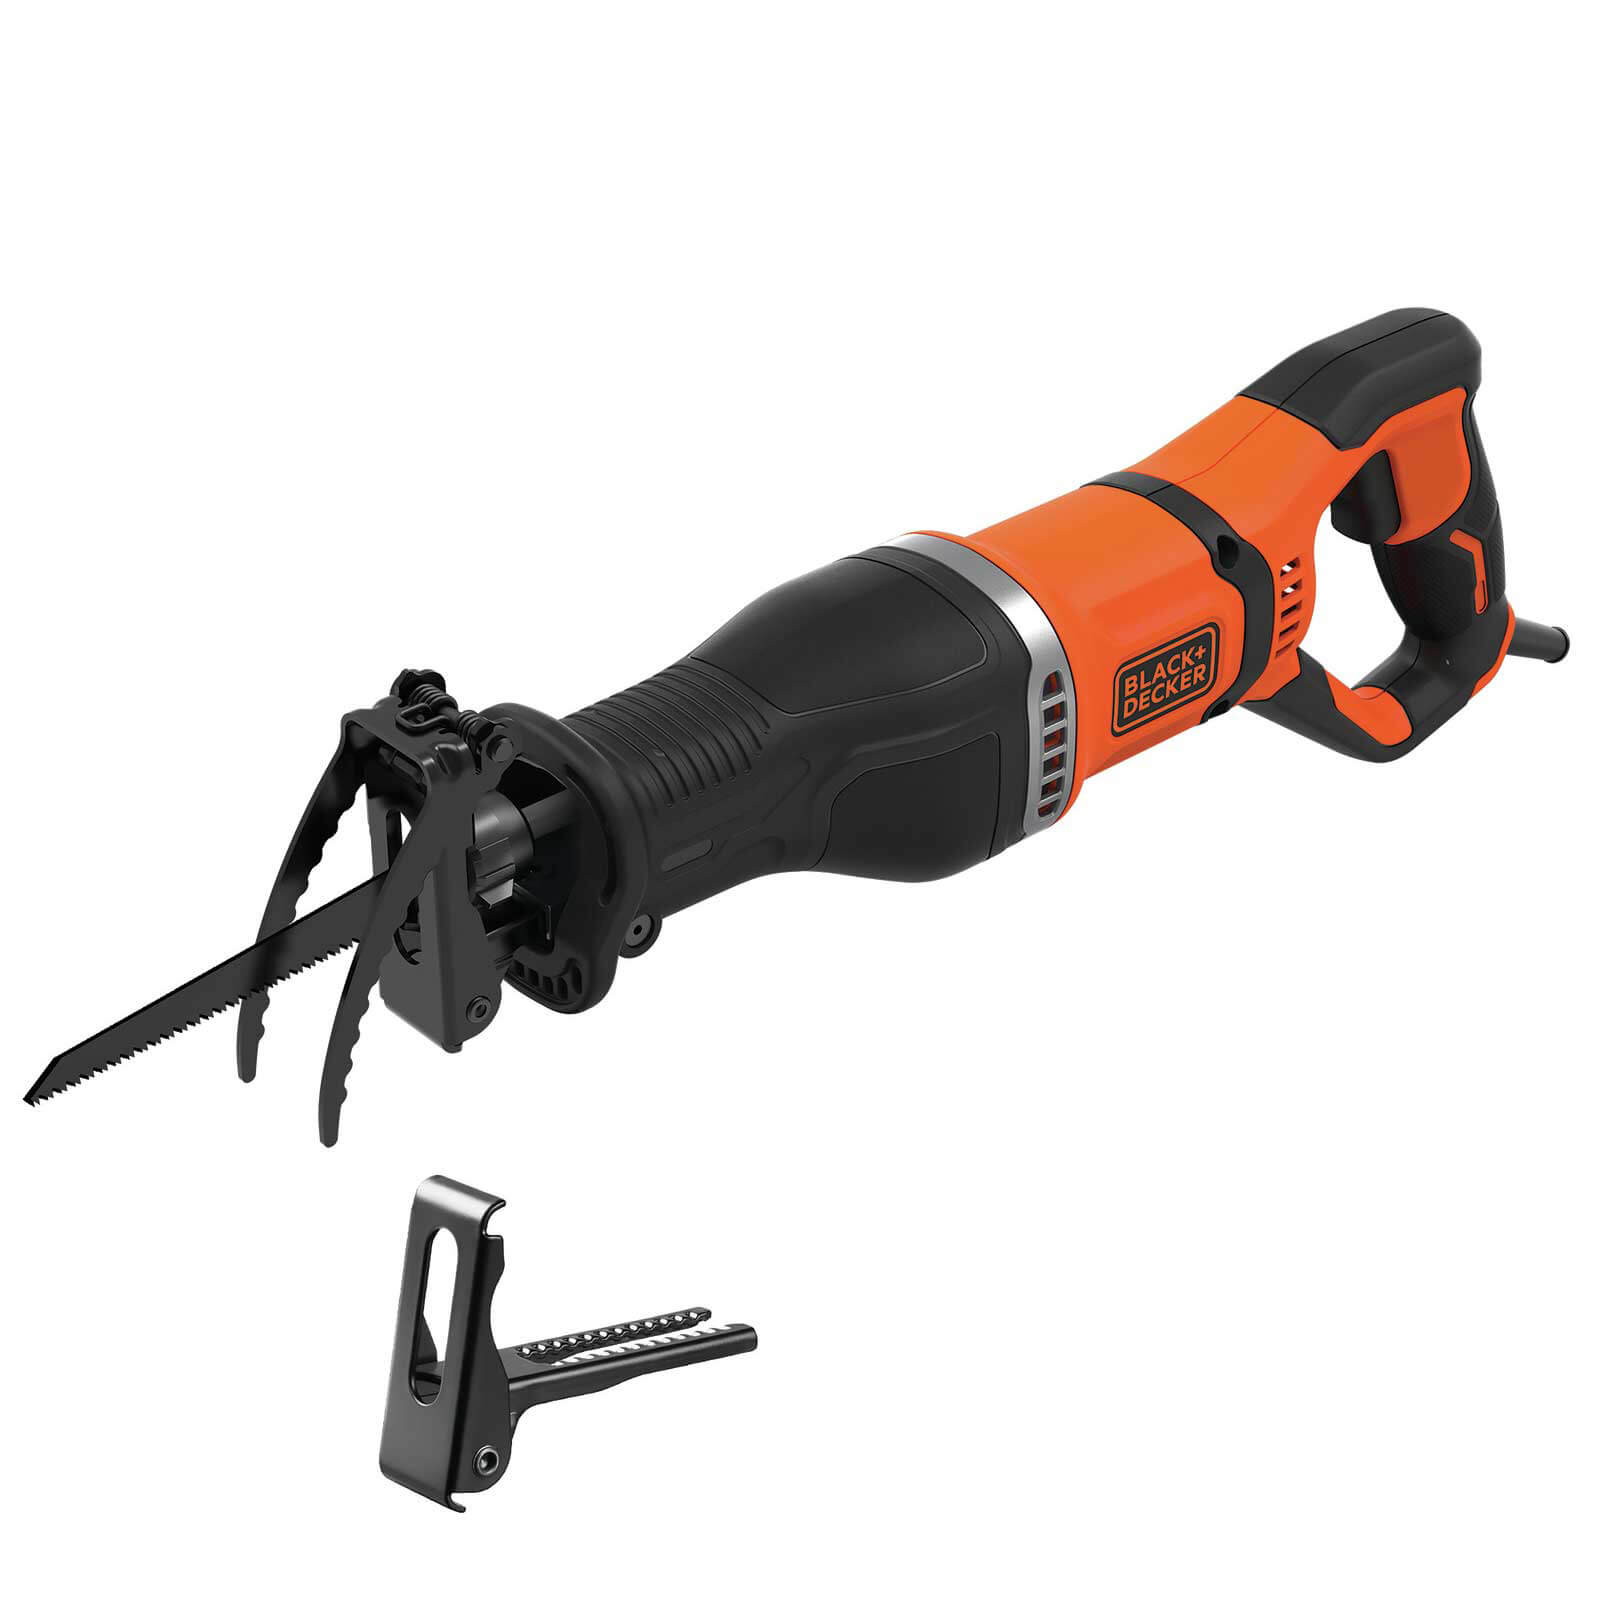 Image of Black and Decker BES301 Reciprocating Saw 240v